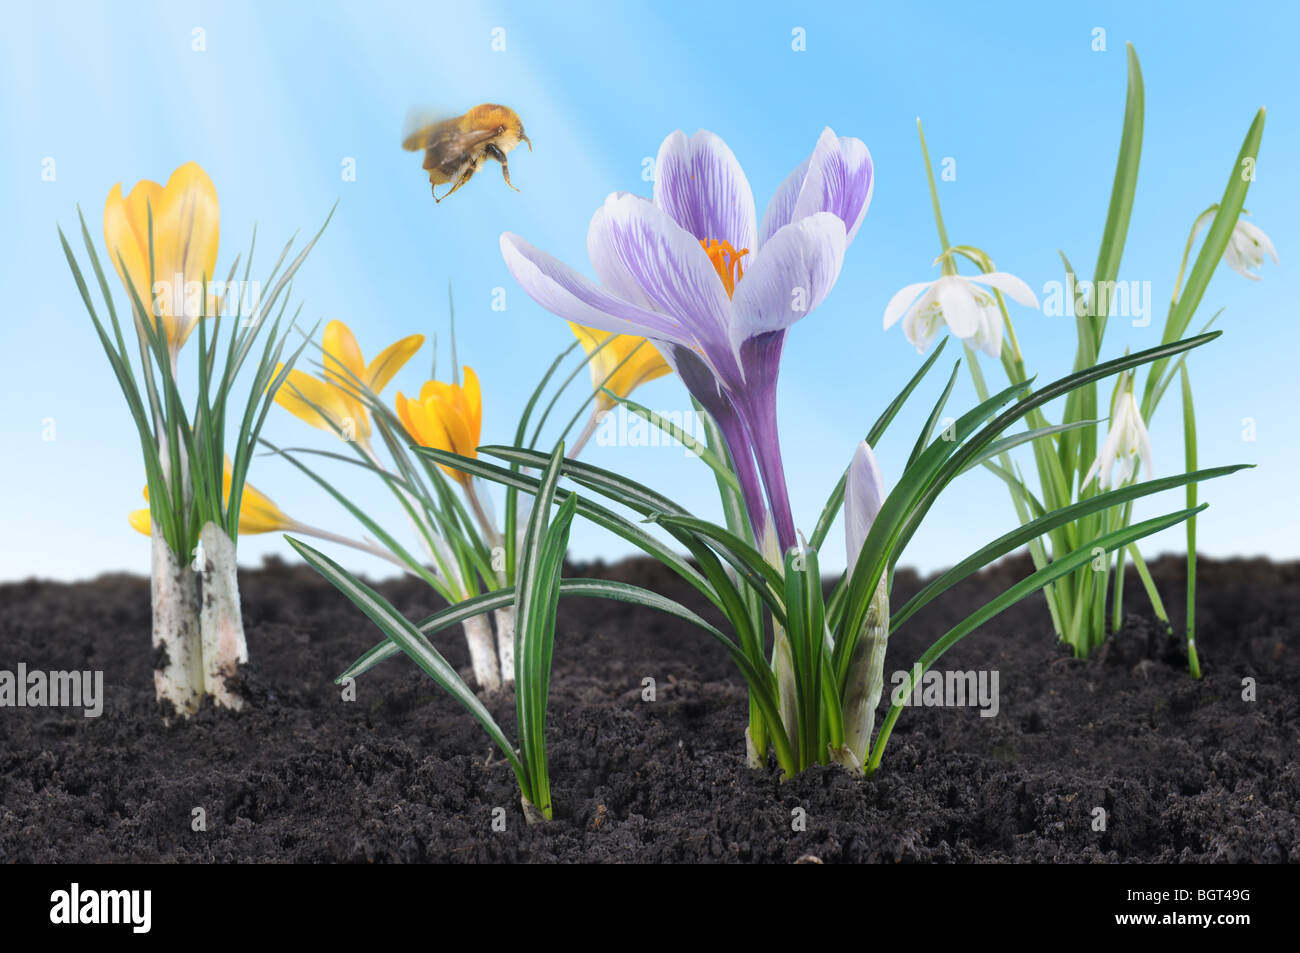 Spring flowers - crocuses and snowdrops - illuminated by sunshine with flying bumblebee. Stock Photo